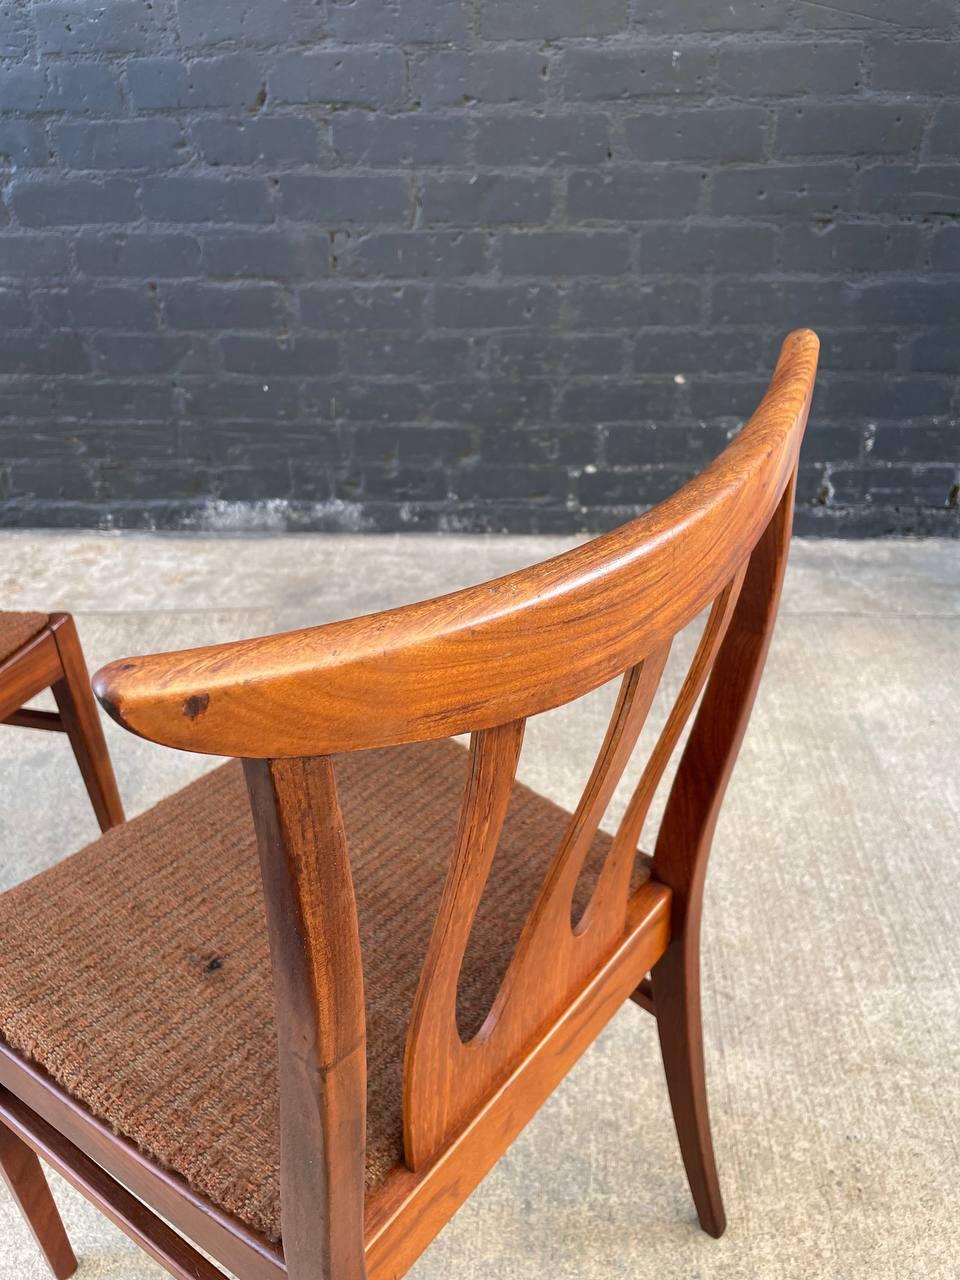 Mid-20th Century Set of 6 Mid-Century Modern “Brasilia” Sculpted Teak Dining Chairs by G-Plan